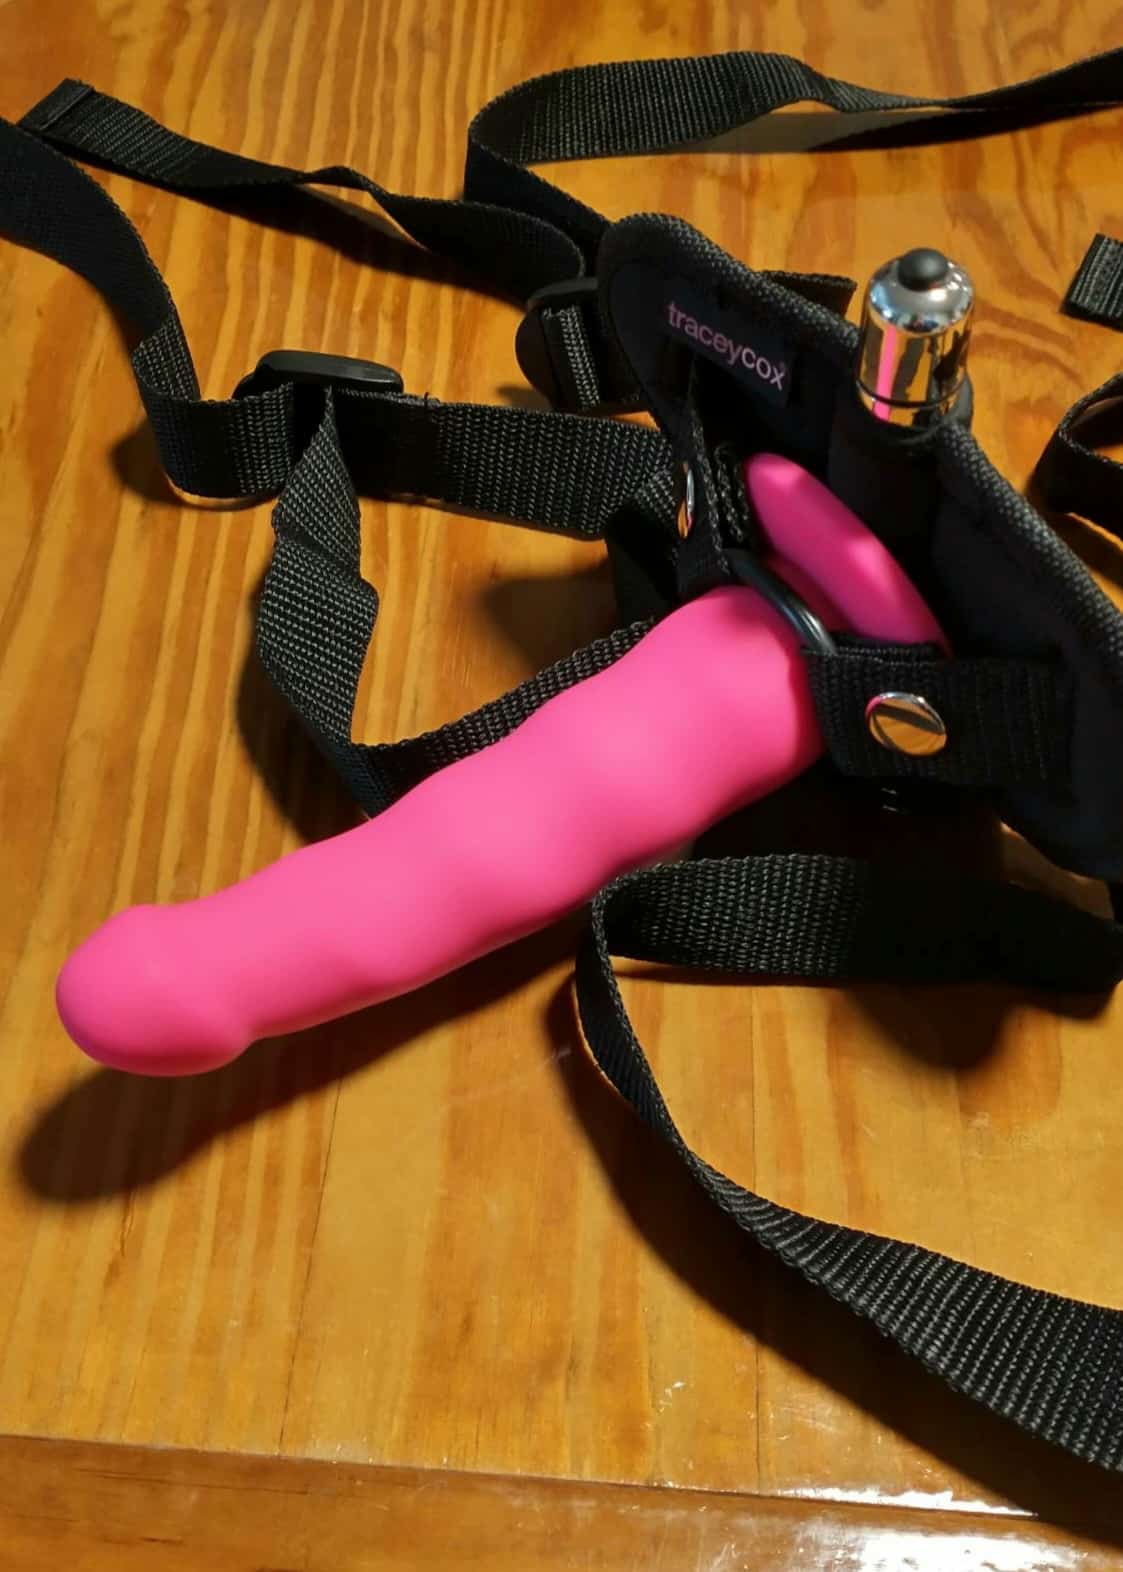 Tracey Cox Supersex Pegging Kit. Slide 3